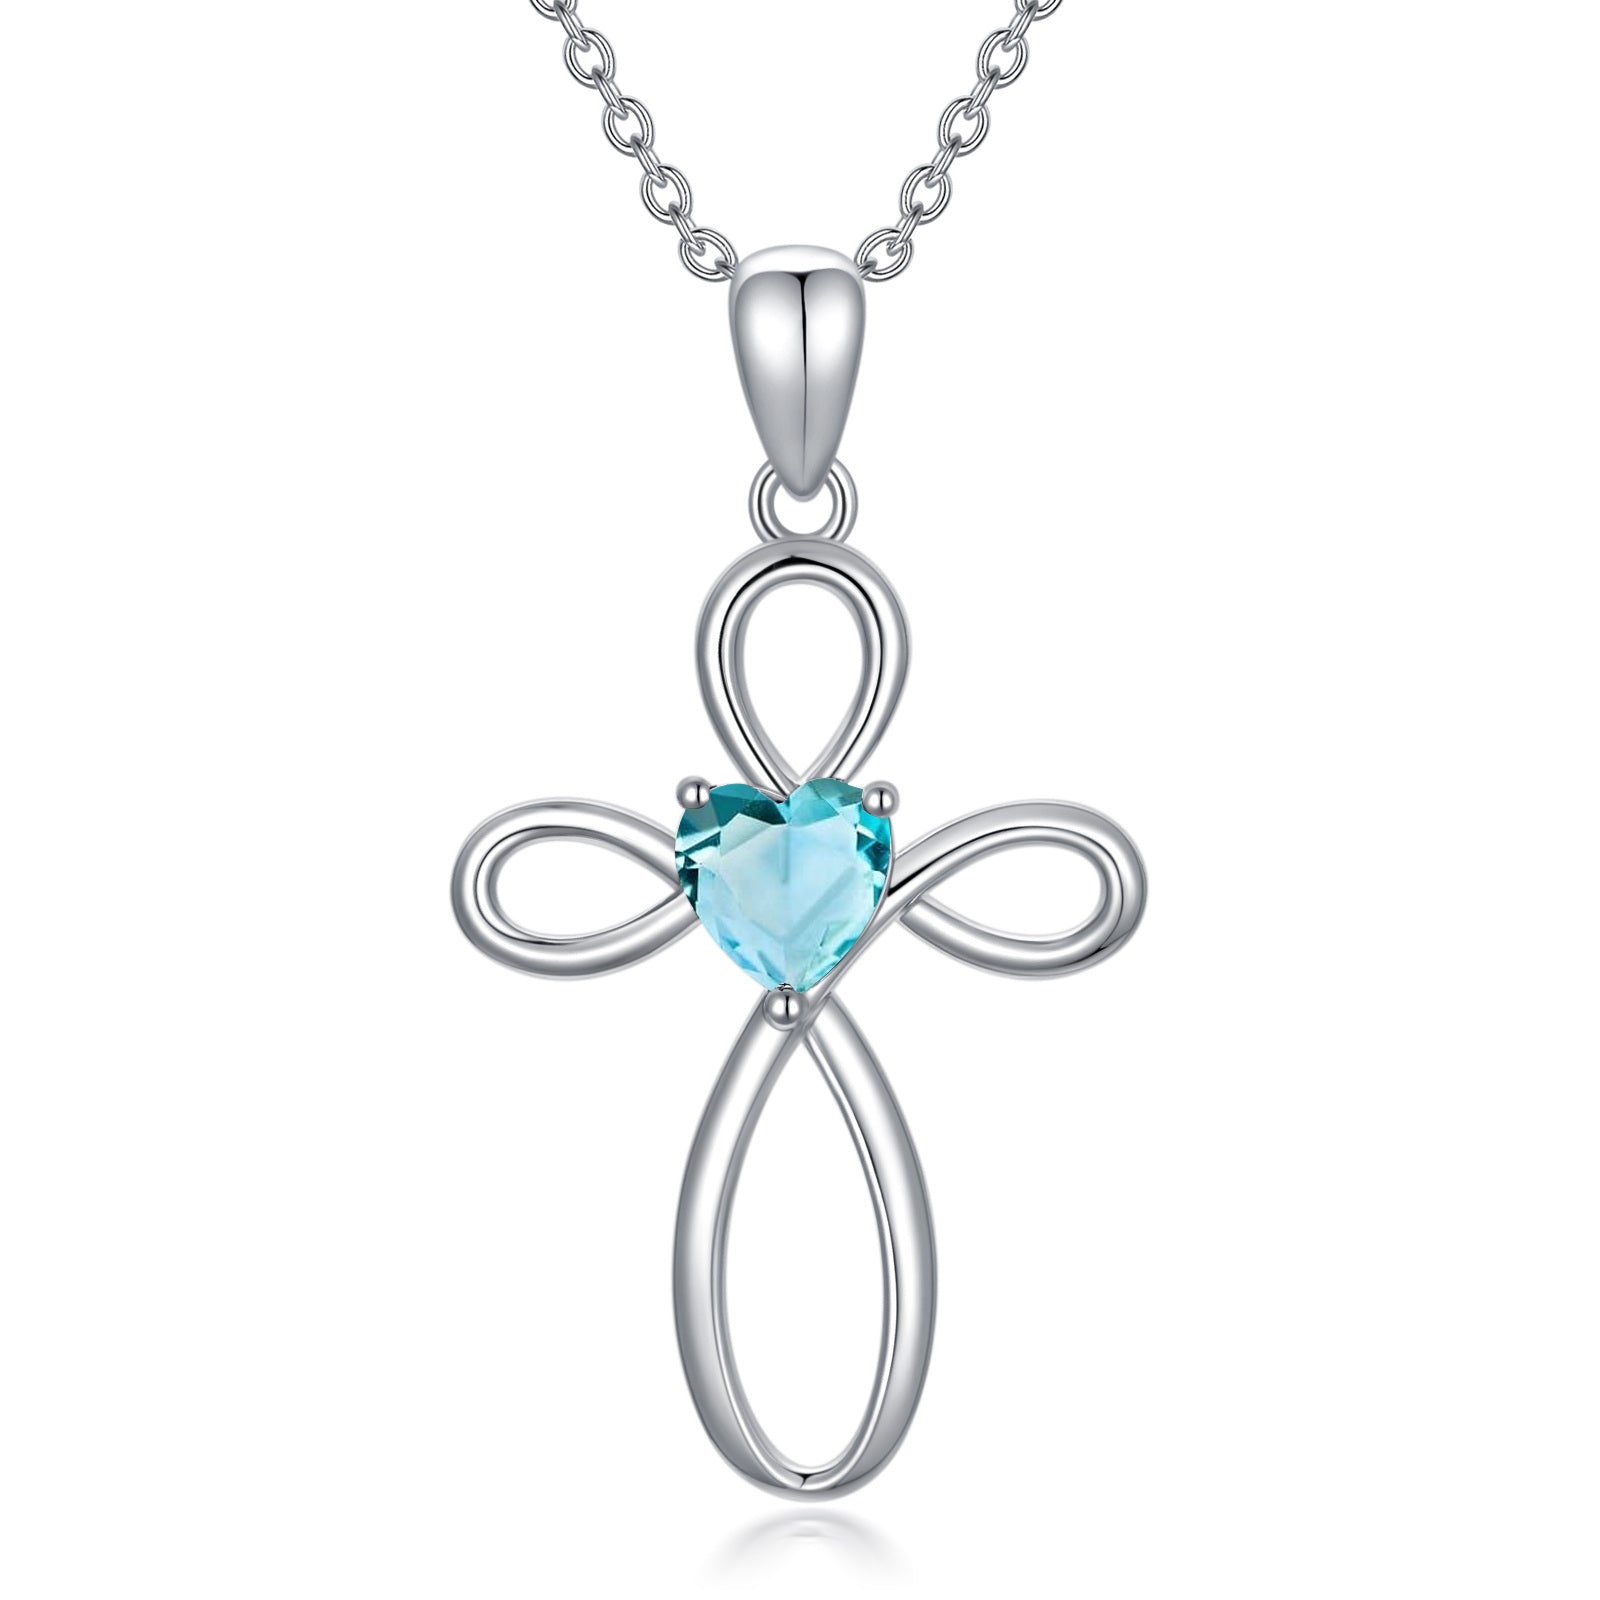 A Maramalive™ Cubic Zirconia Cross Birthstone Pendant Necklace in Sterling Silver for Women Men.